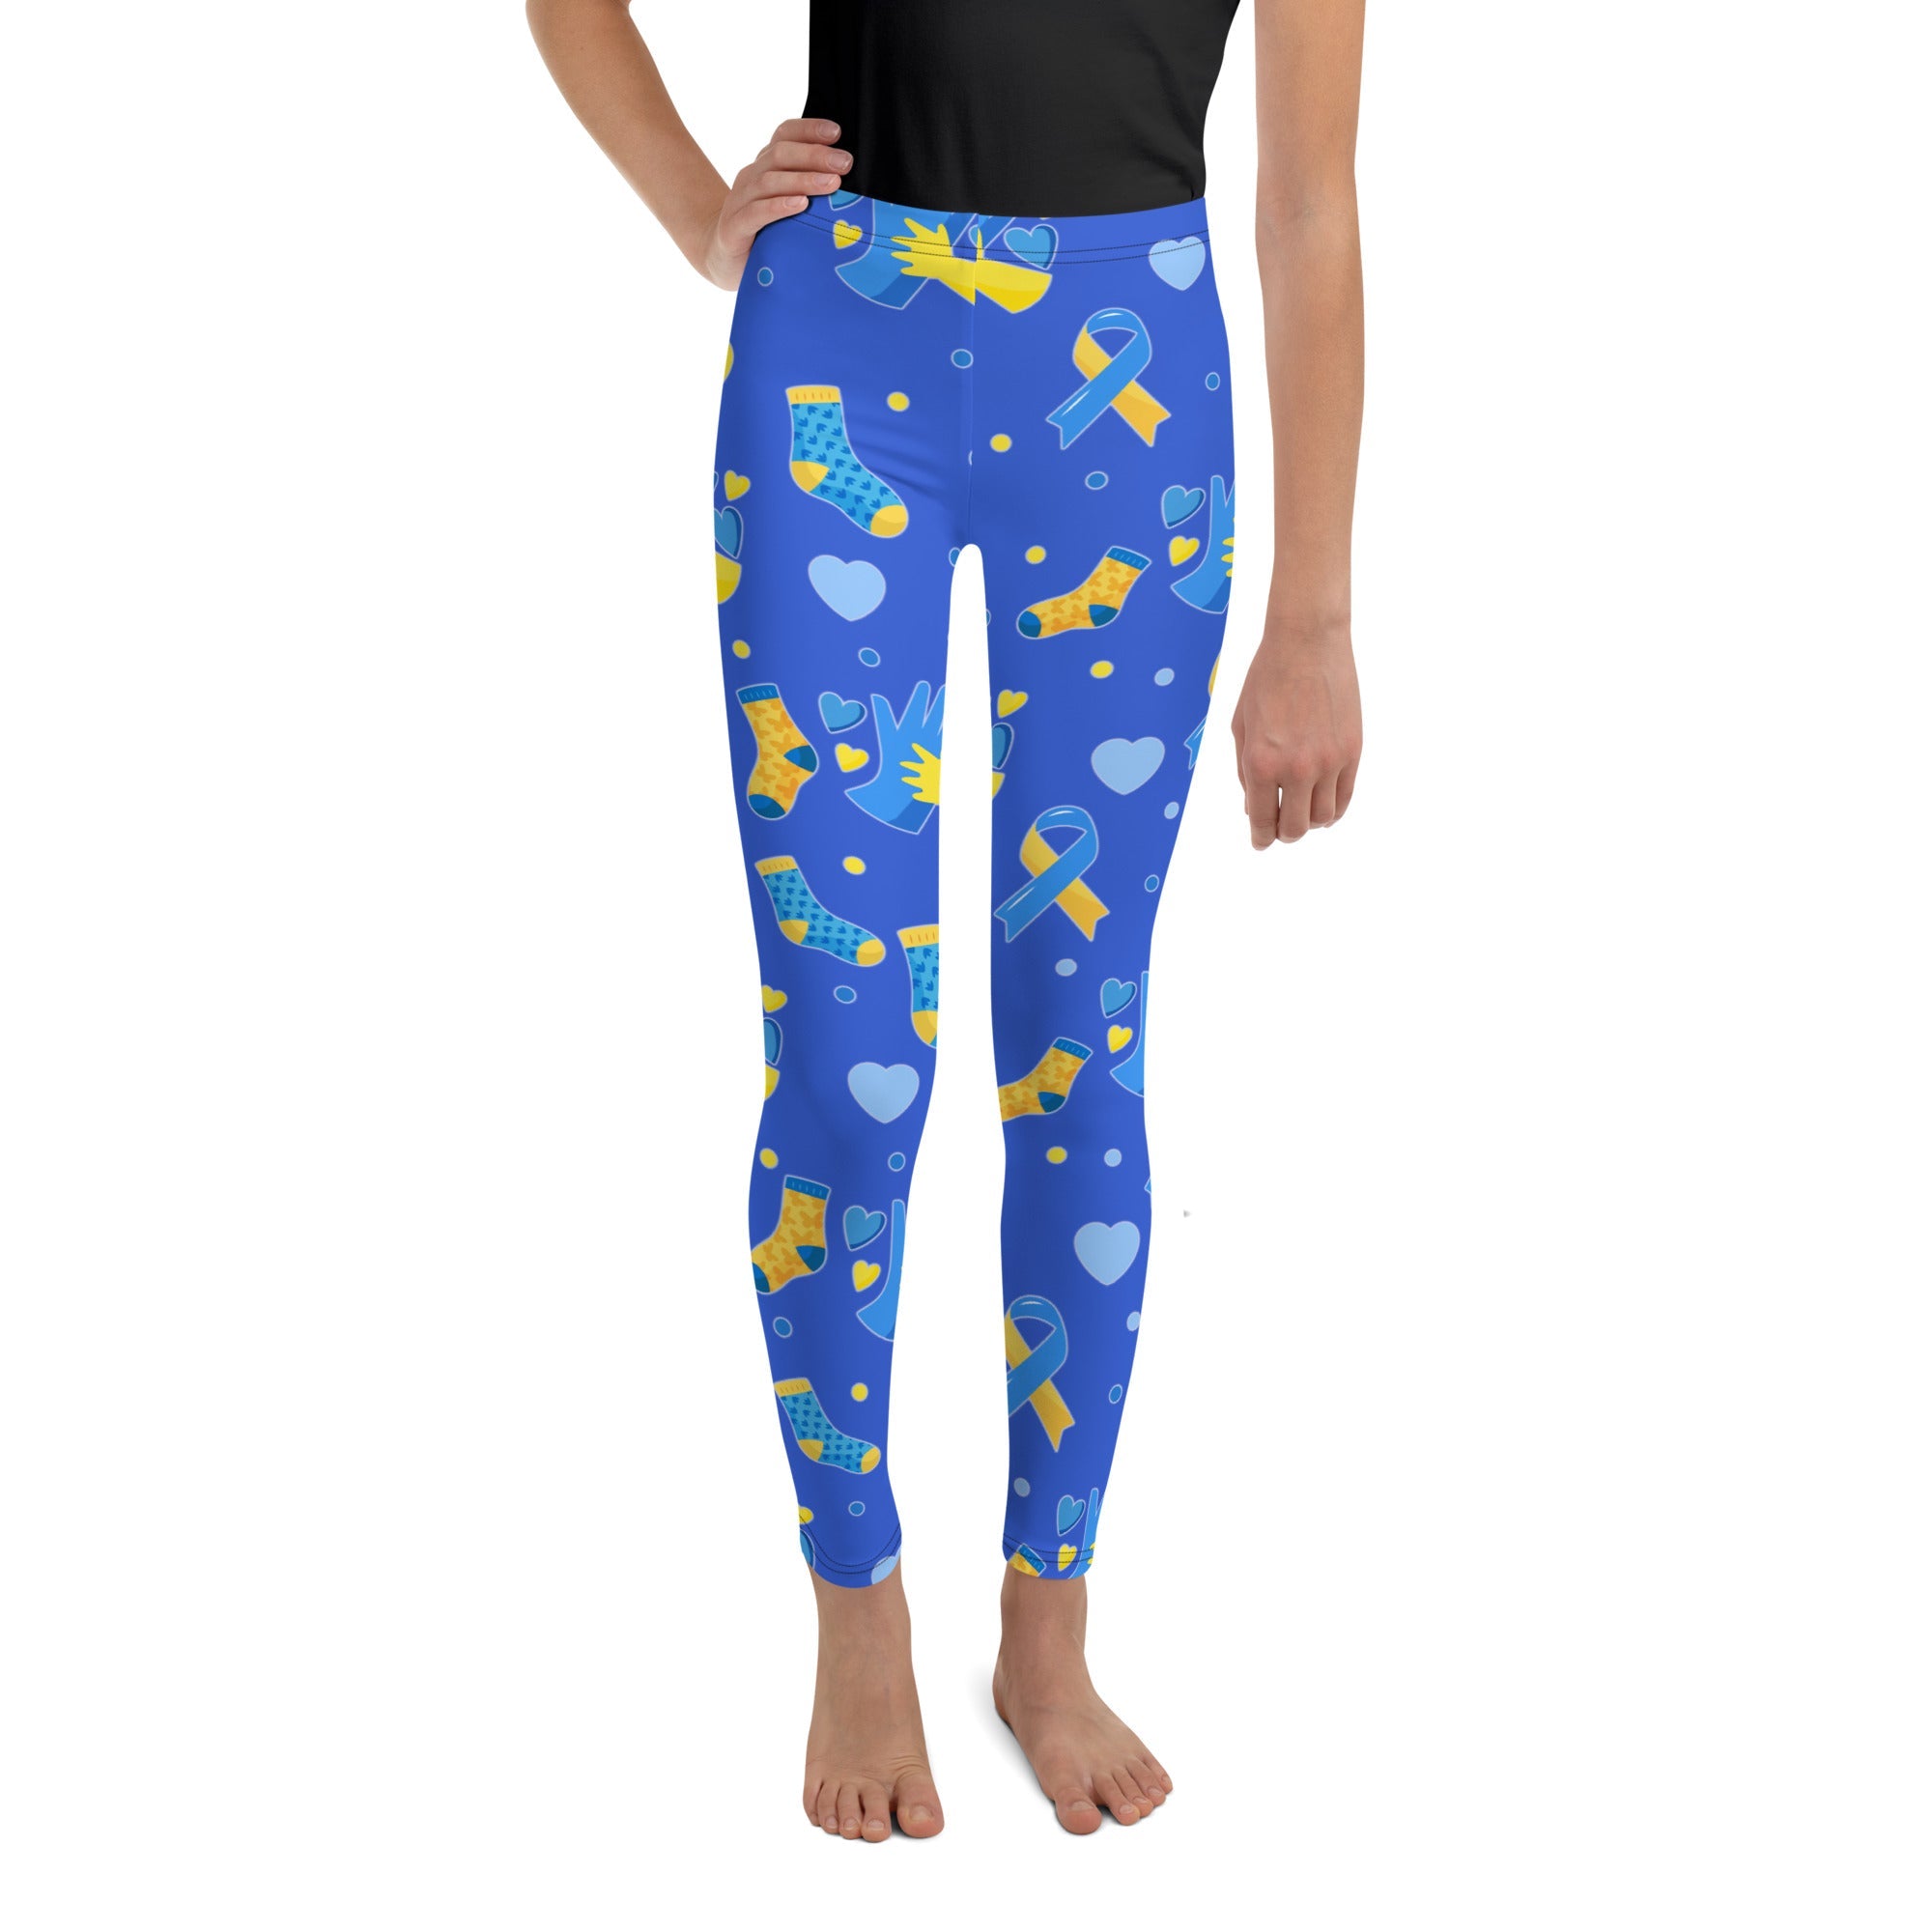 Down Syndrome Awareness Youth Leggings